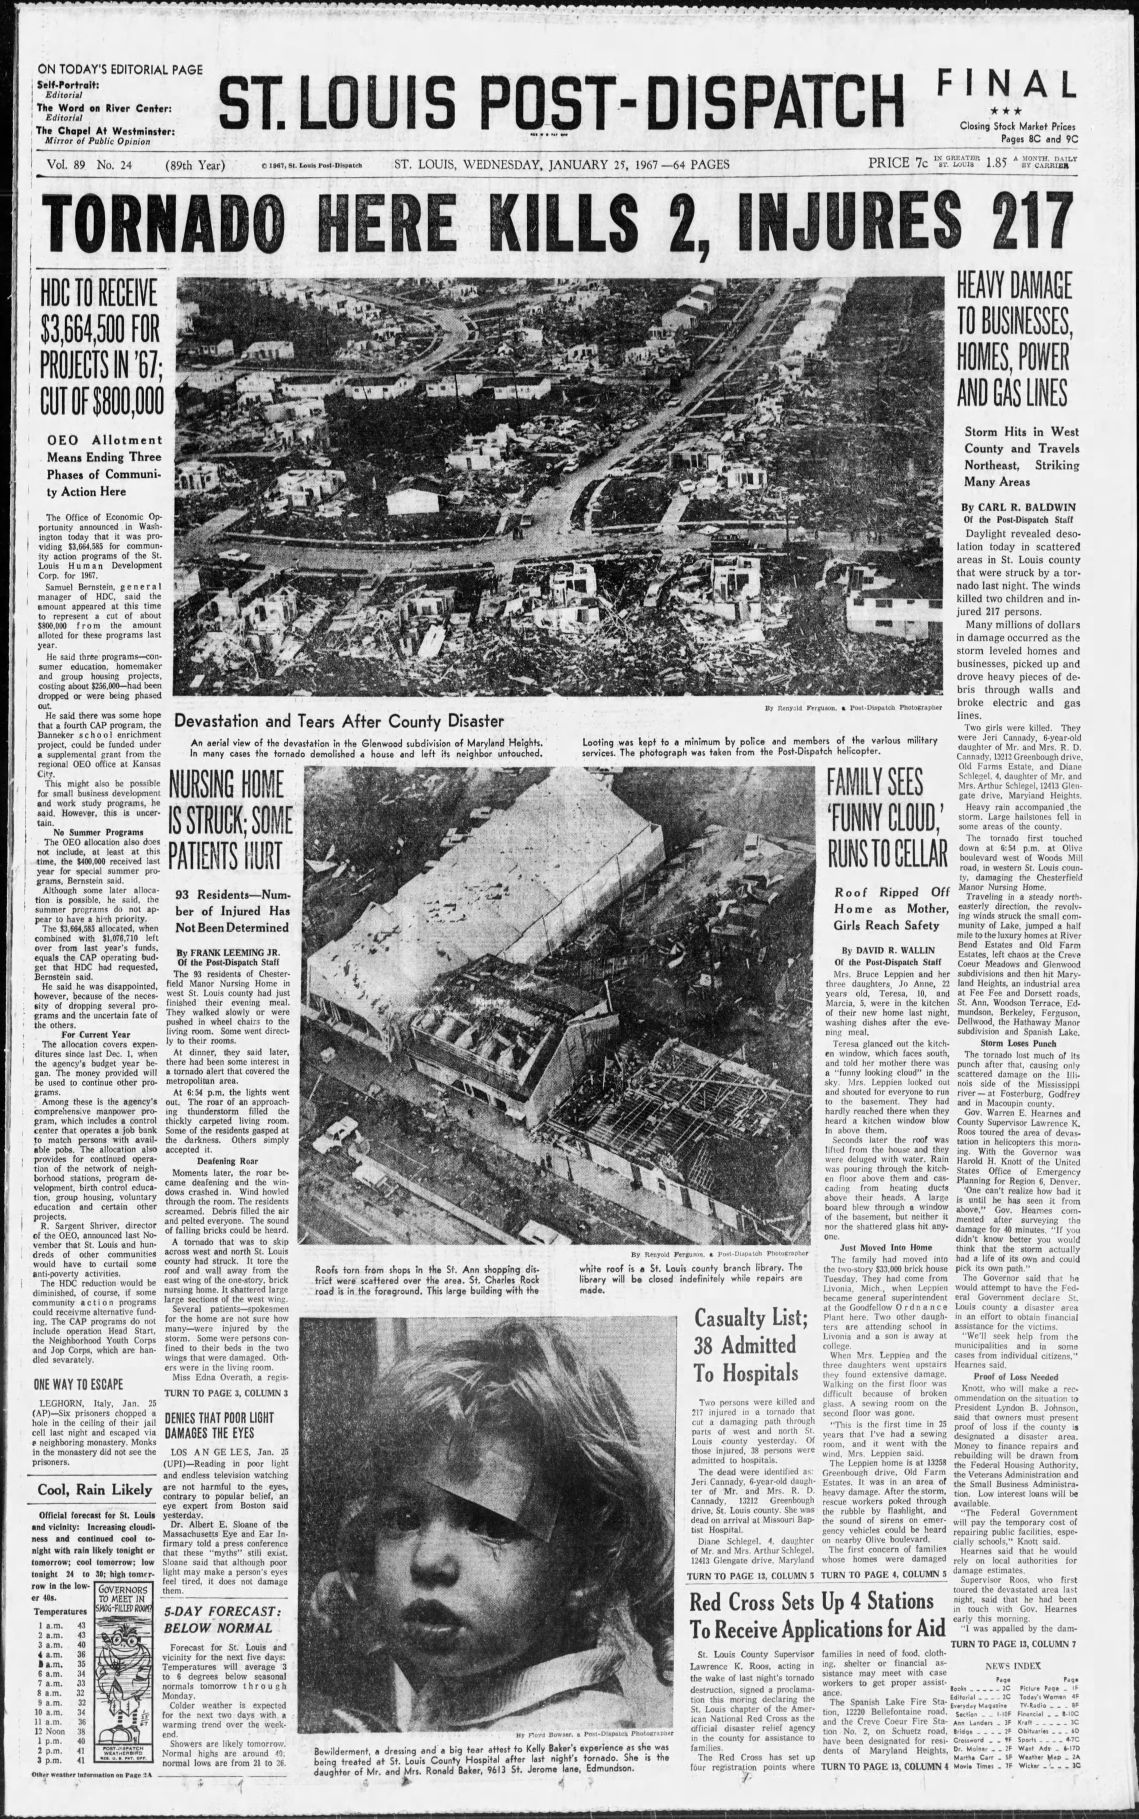 Post-Dispatch pages: The Tornado of 1967 | Post-Dispatch Archives | www.paulmartinsmith.com